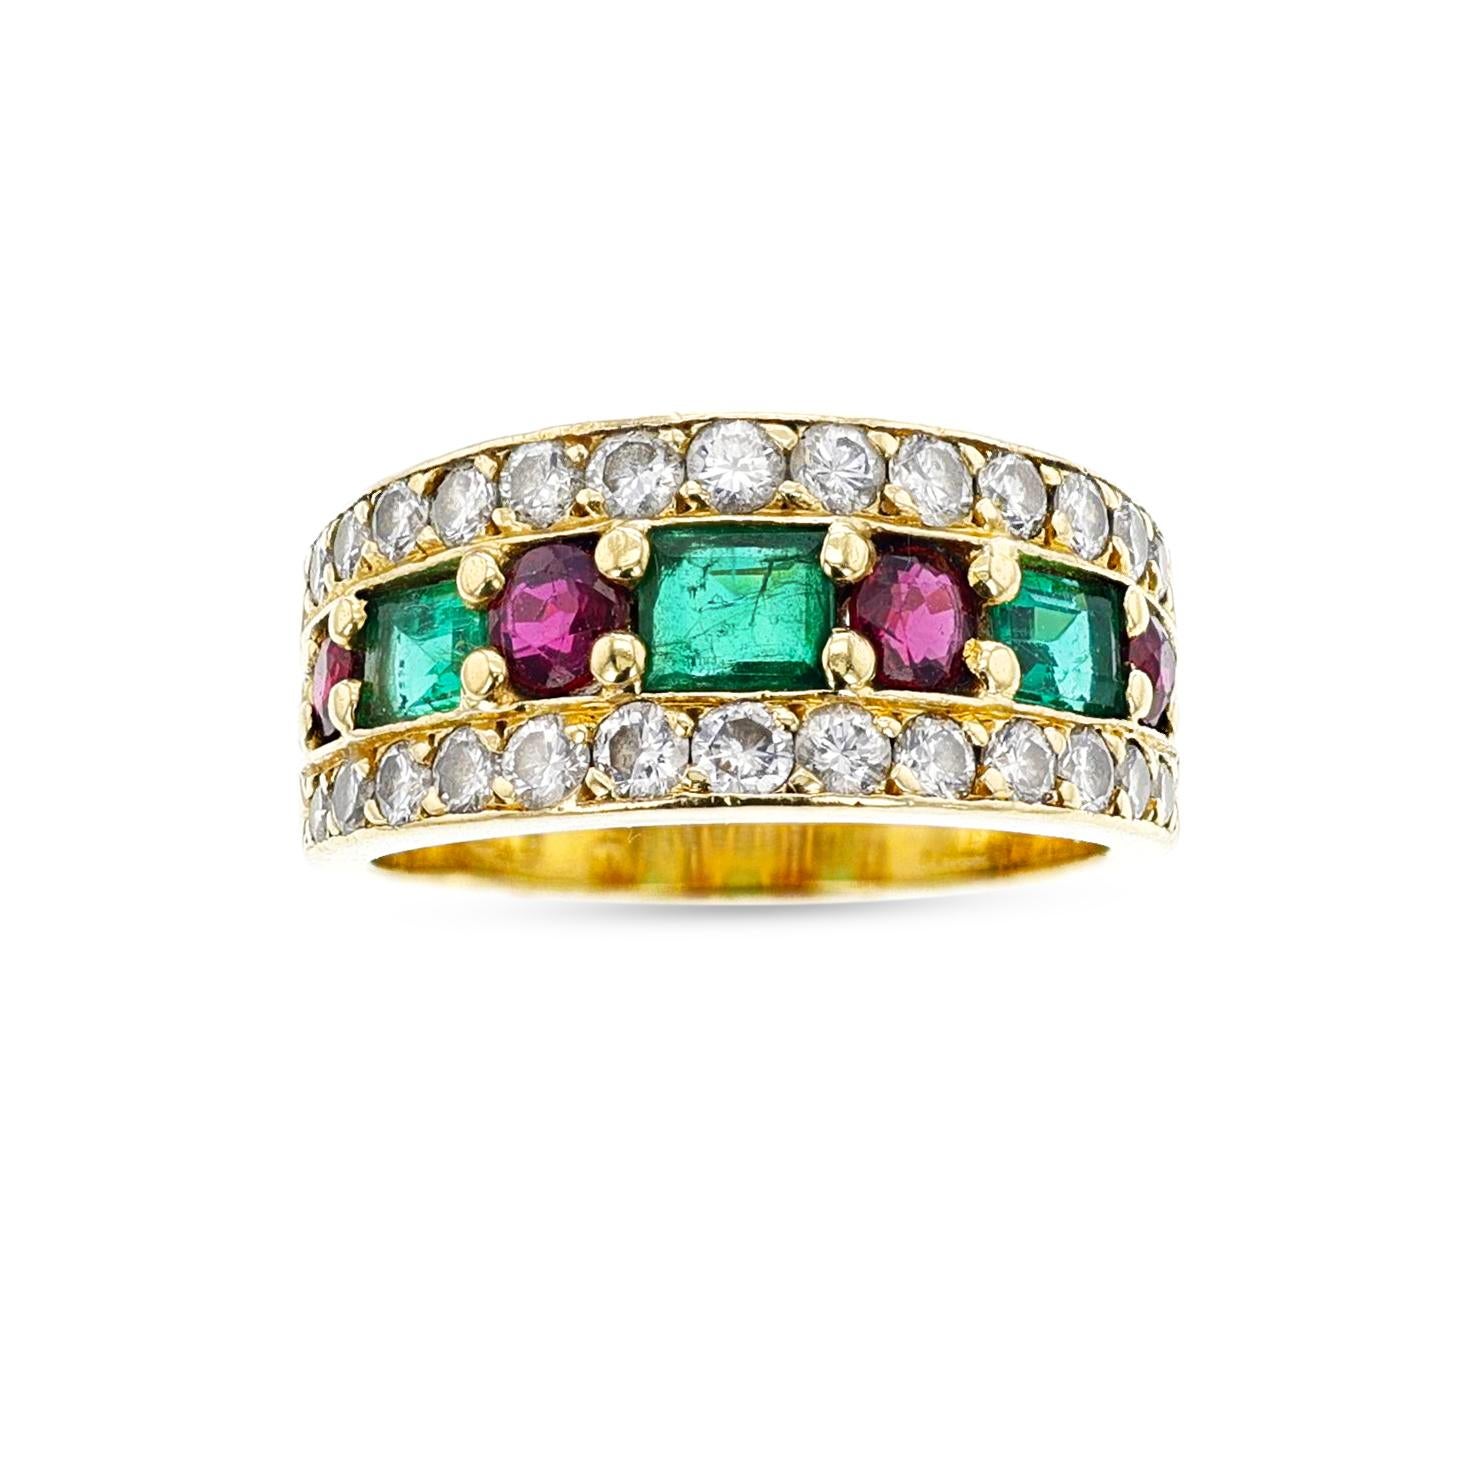 A beautiful emerald, ruby, and diamond yellow gold ring by Van Cleef & Arpels. The ring is set with three rectangular step-cut emeralds, round mixed-cut rubies, and round brilliant-cut diamonds, set in 18k yellow gold. The ring is engraved “VCA” and